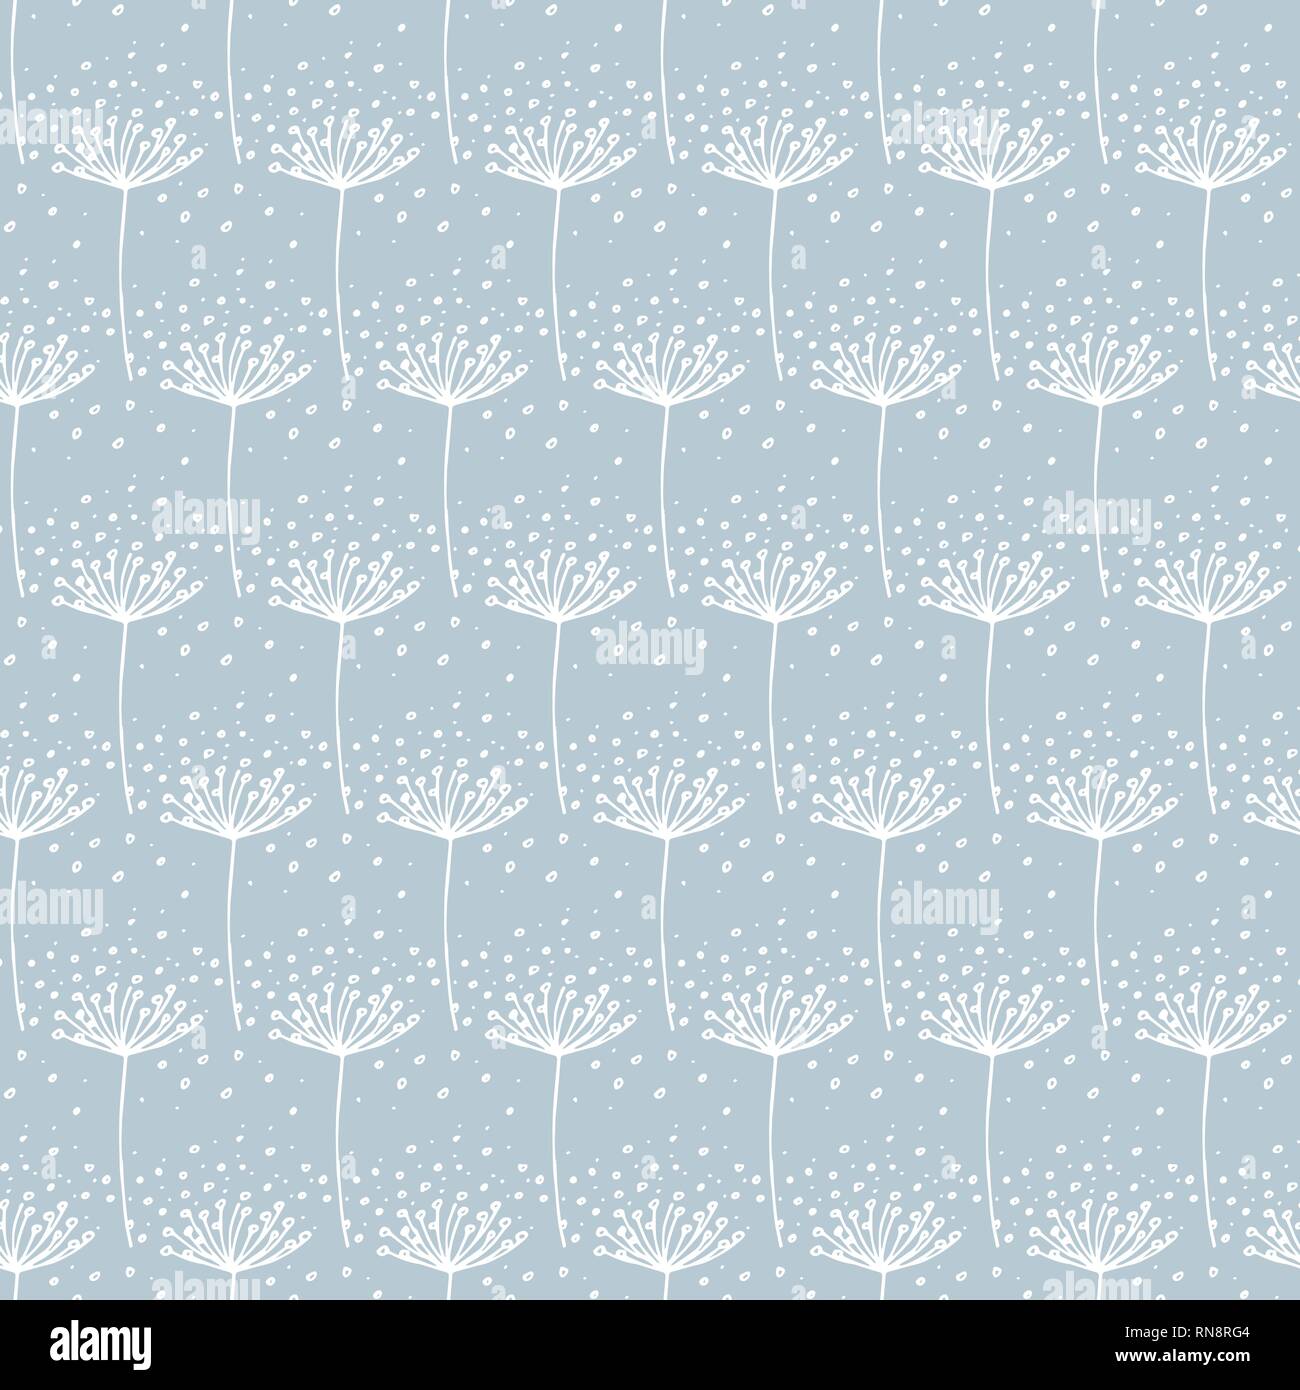 Vector Hand drawn white dandelion on light blue background repeat seamless pattern. Stock Vector